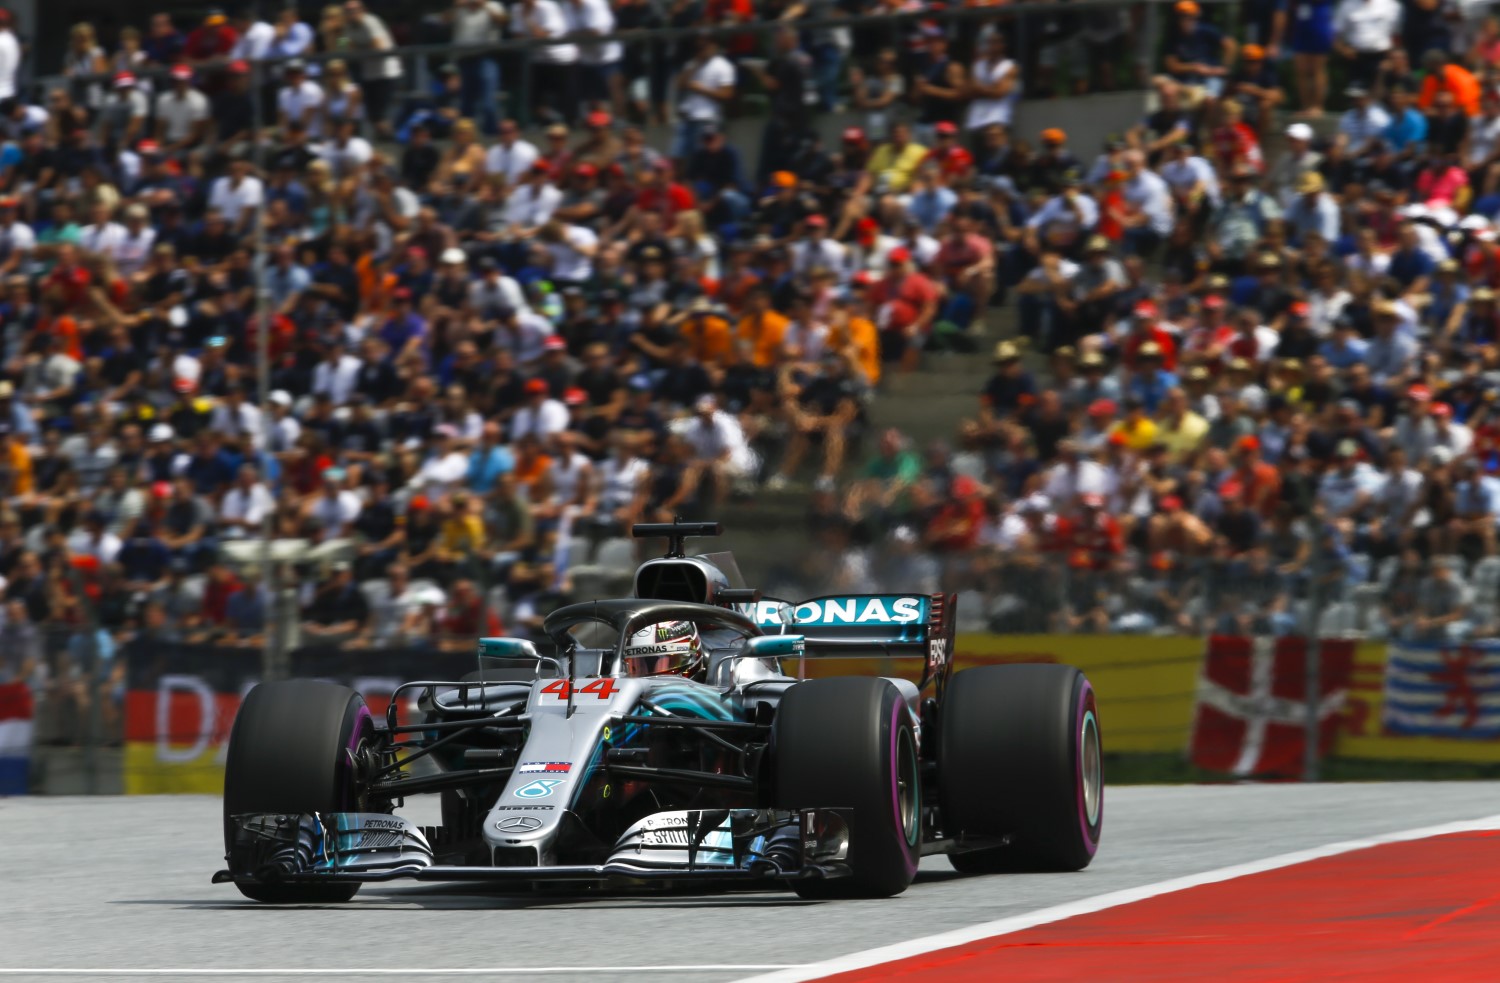 Hamilton easily fastest at Silverstone, his favorite track